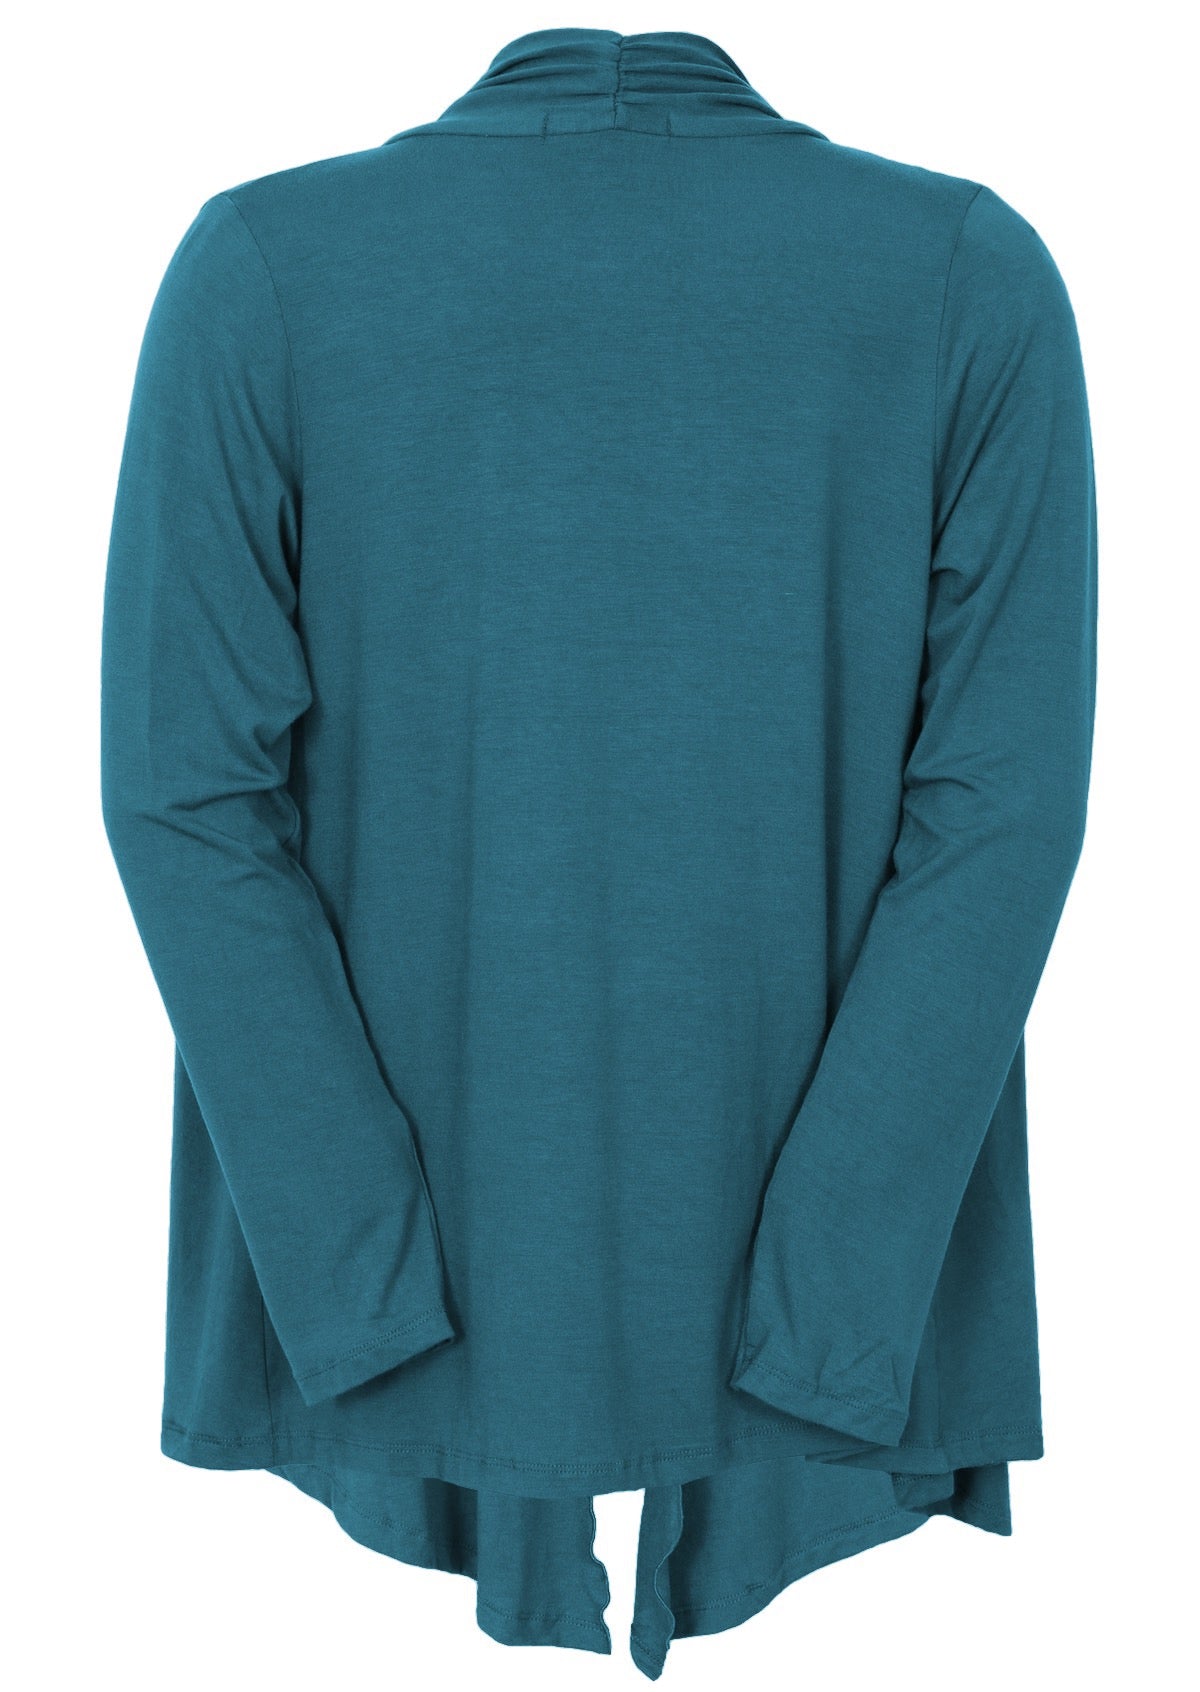 back view ruched back of neck cardi teal